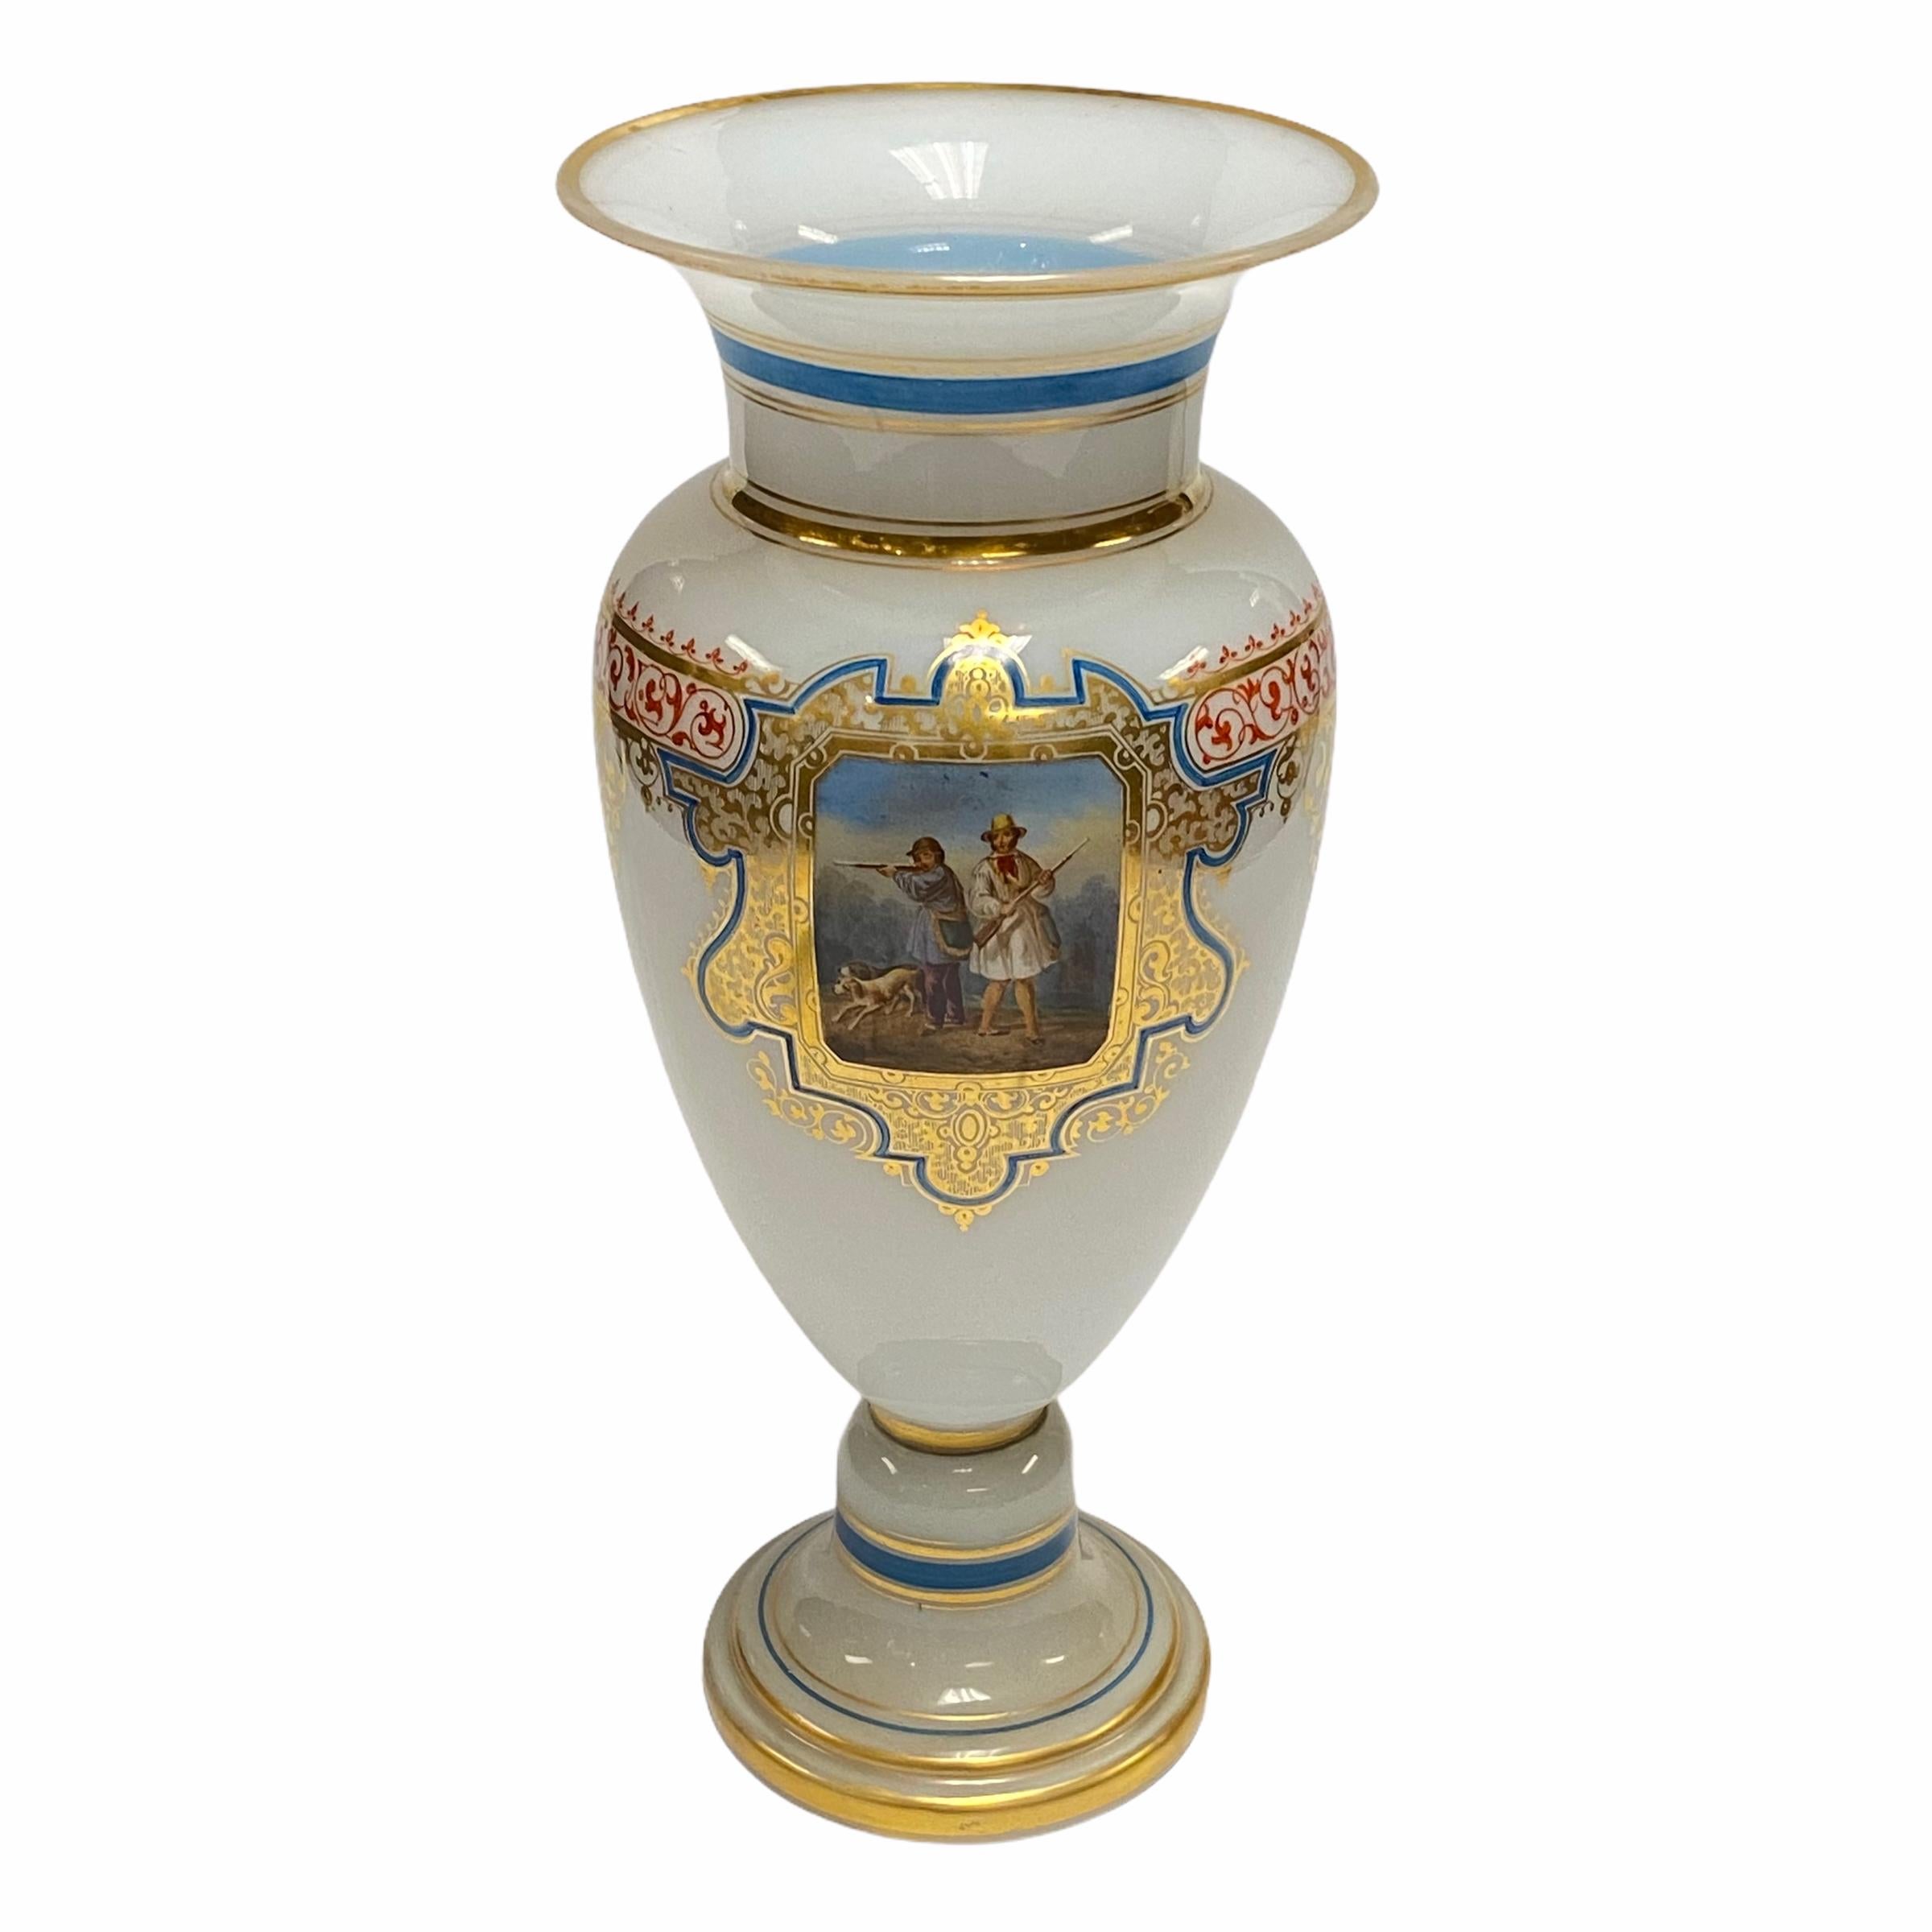 Fine French White Opaline Glass Vase with Painted Hunting Scene of Very Good Quality

Stock Number: DA158